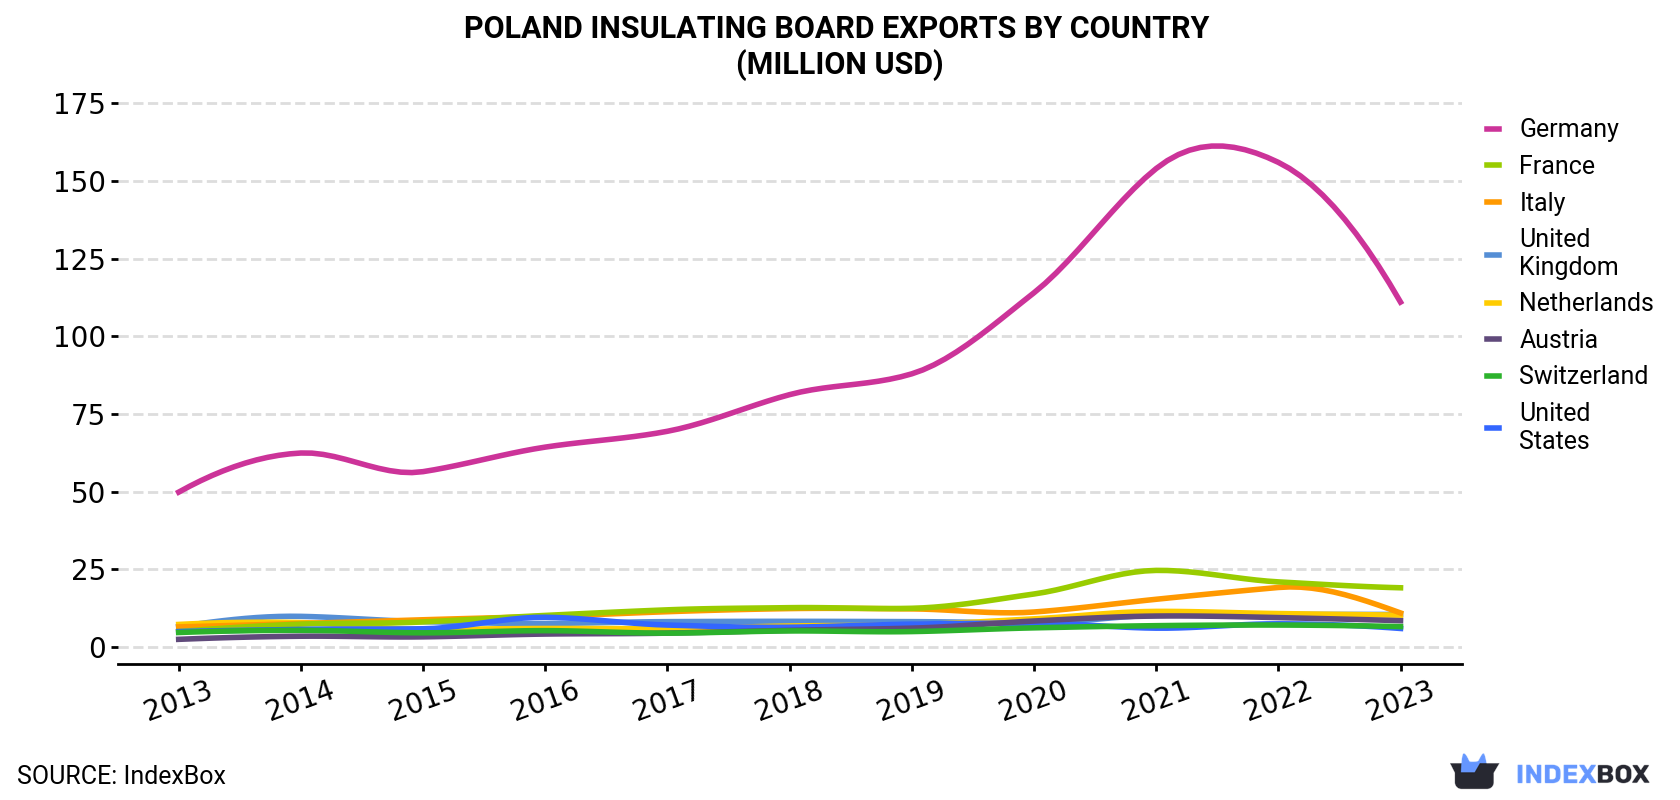 Poland Insulating Board Exports By Country (Million USD)